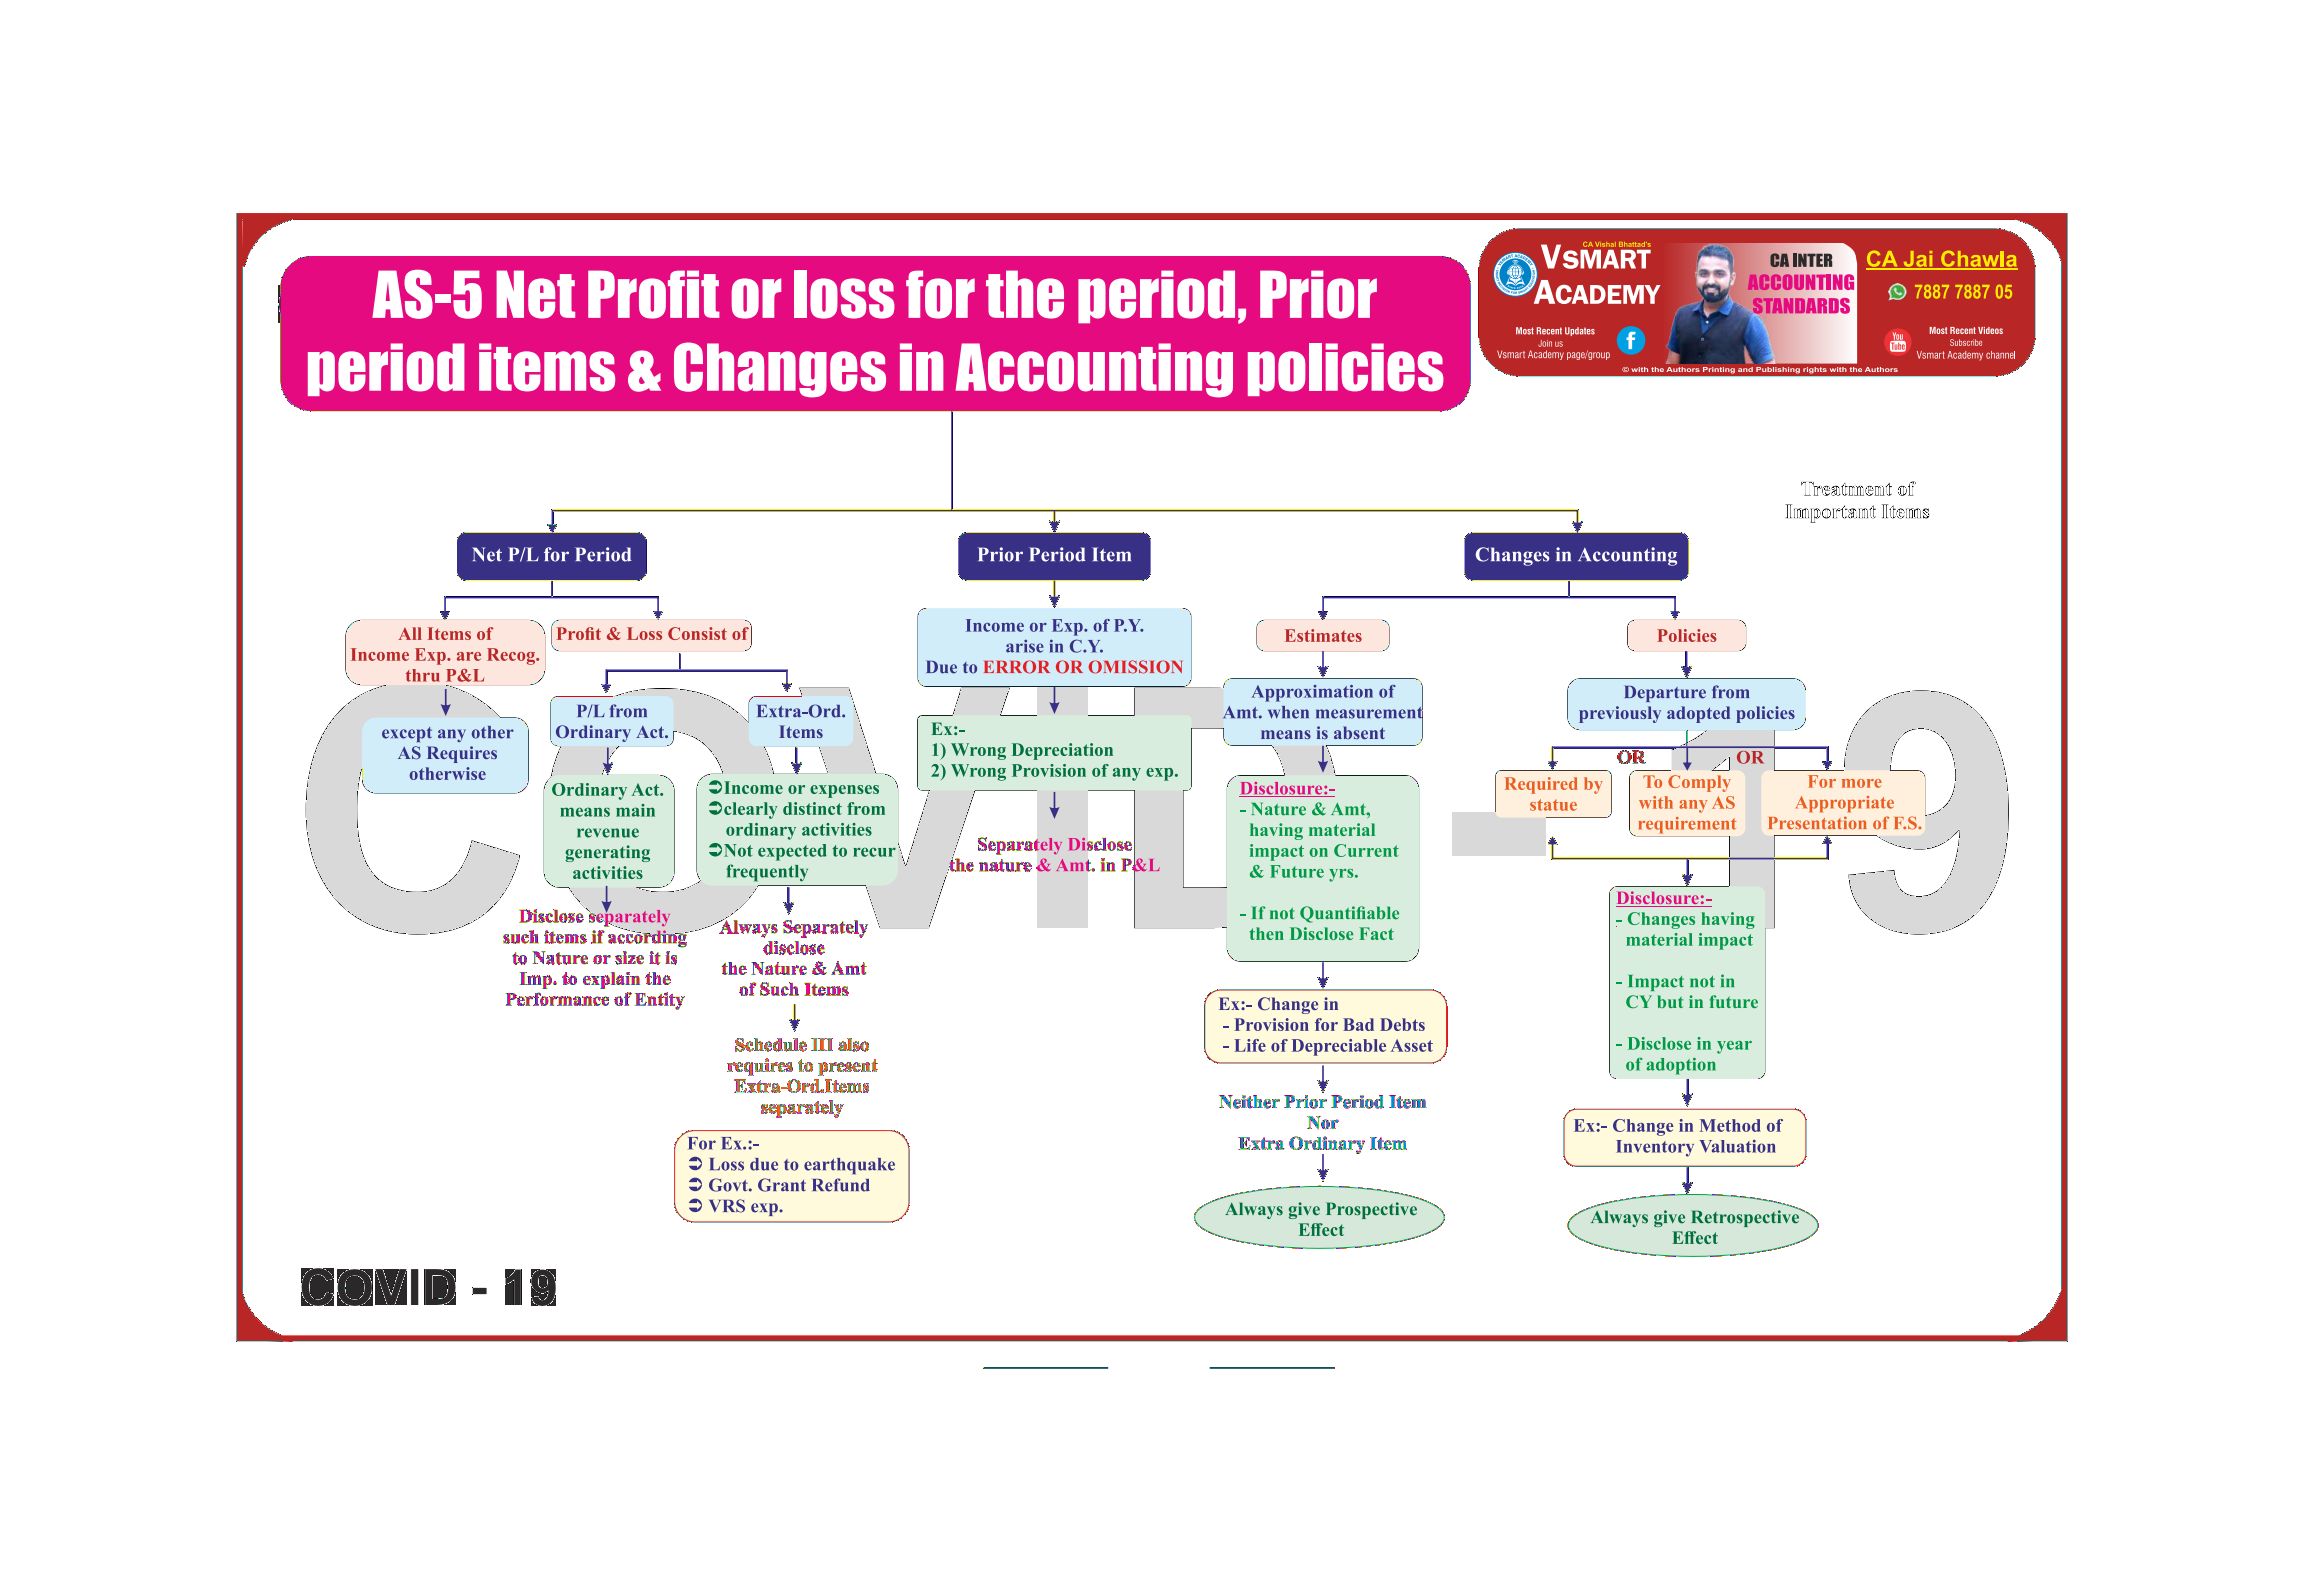 AS-5 Net Profit or Loss for the Period, Prior Period Items and Changes in Accounting Policies Charts by CA Jay Chawla